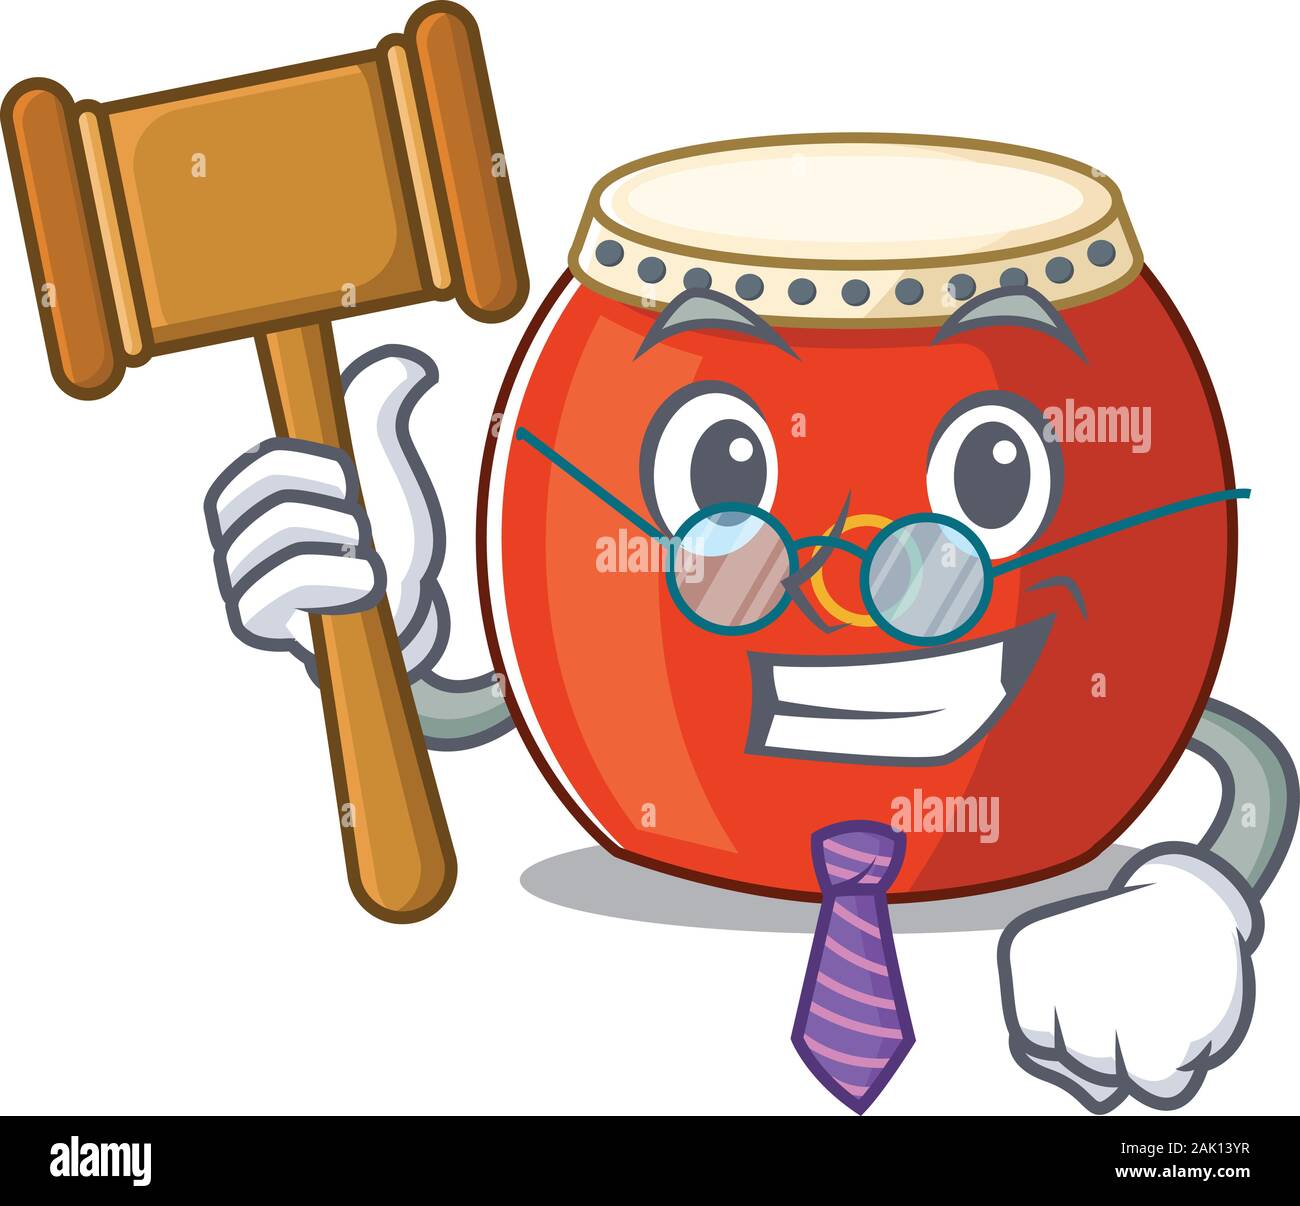 Smart Judge chinese drum in mascot cartoon character style Stock Vector